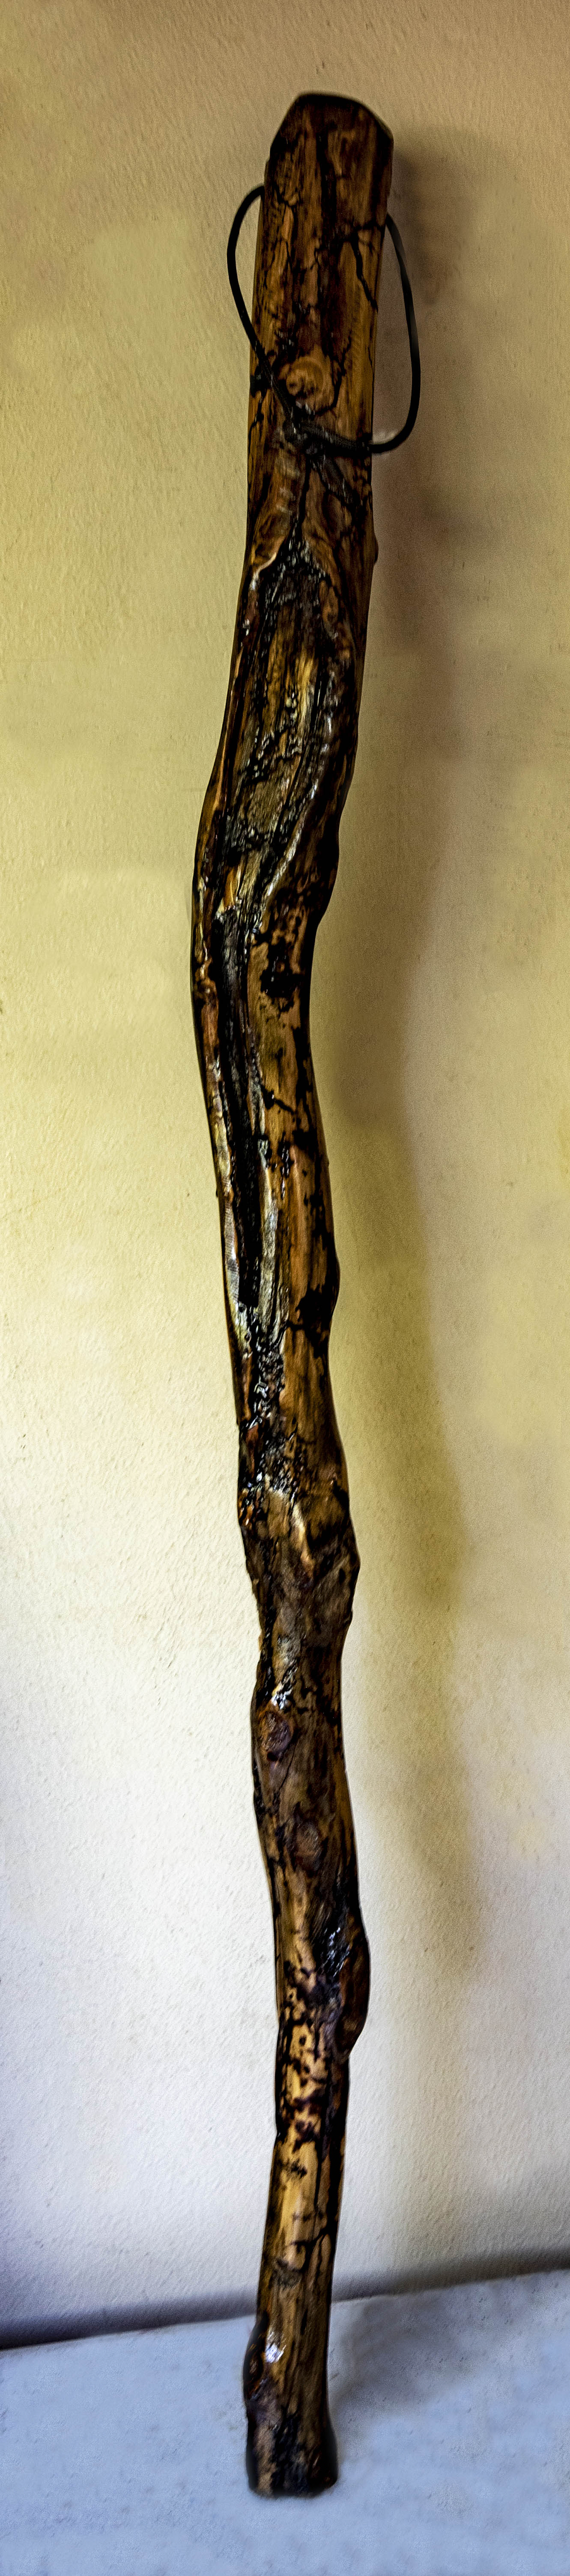 A DIY Walking Stick Whittled From A Branch - Rustic Crafts & DIY